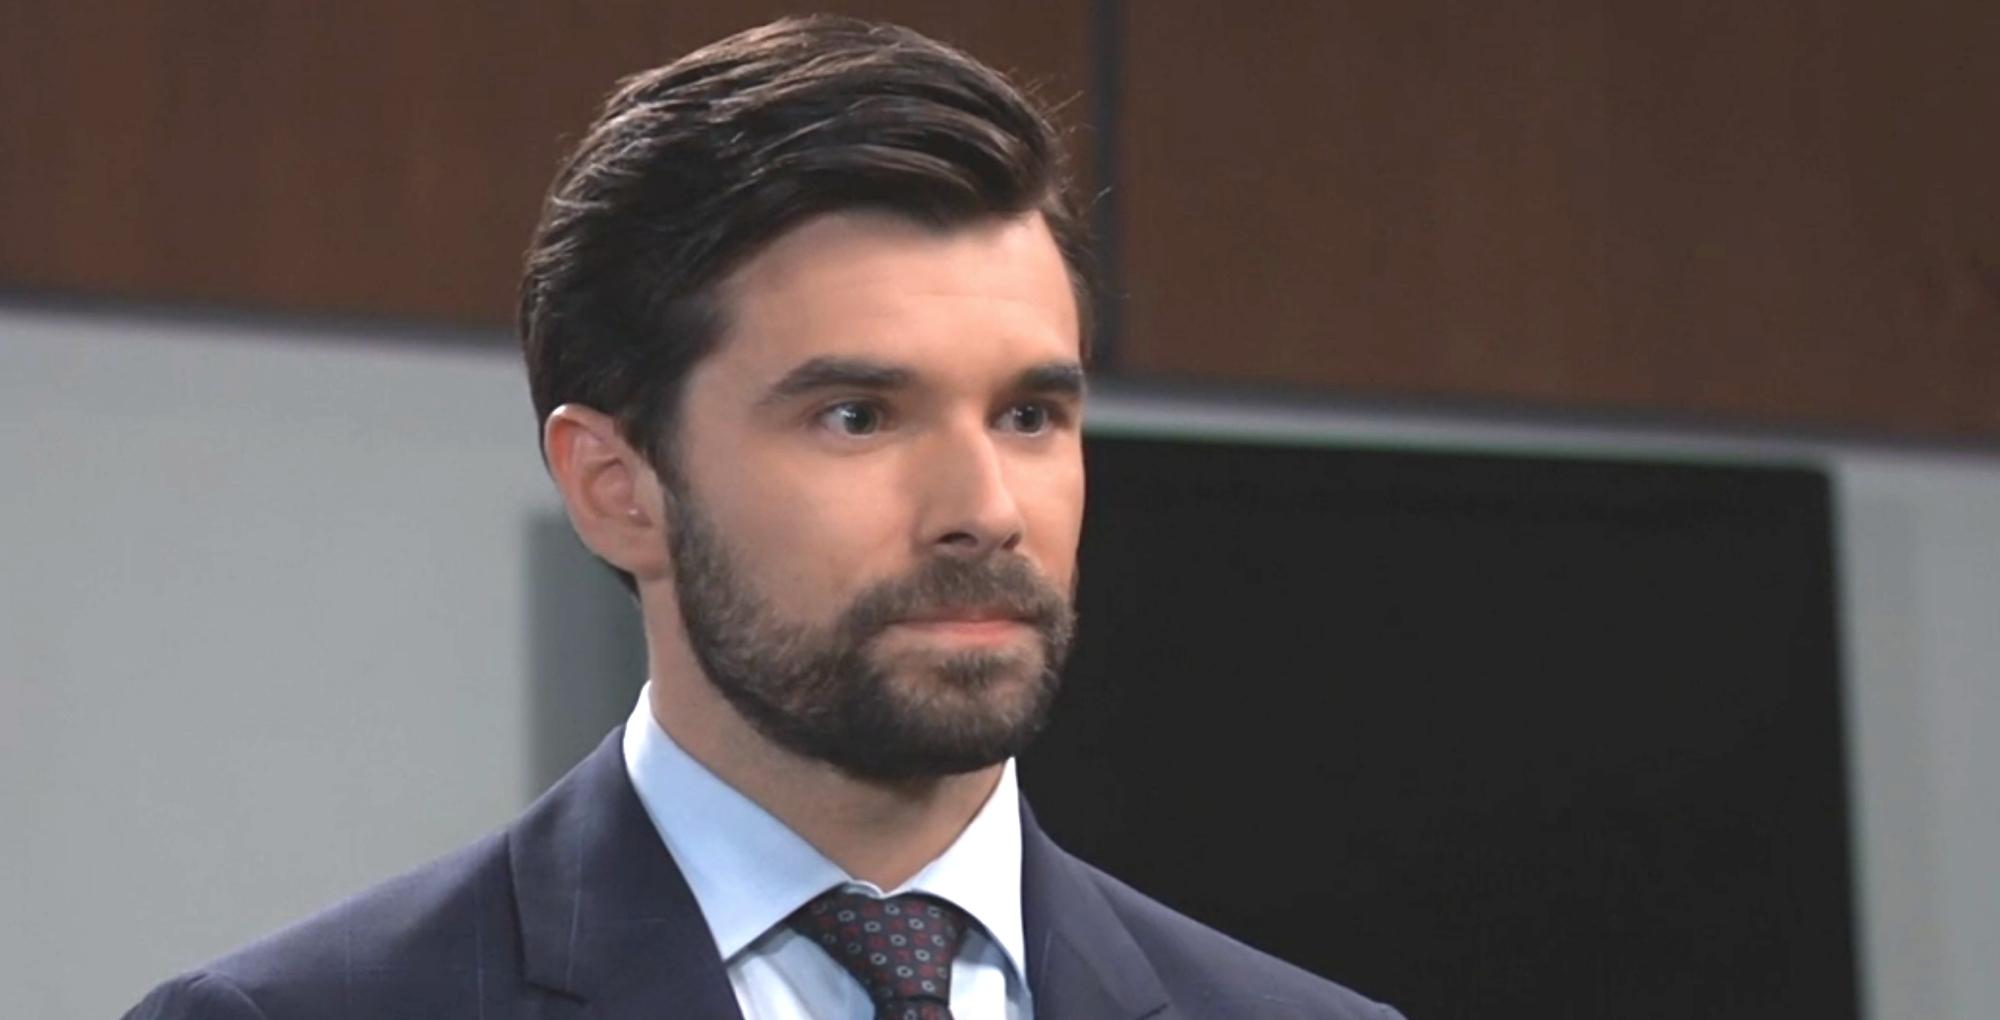 general hospital spoilers for april 18, 2023 have chase in a suit wanting to be a cop.